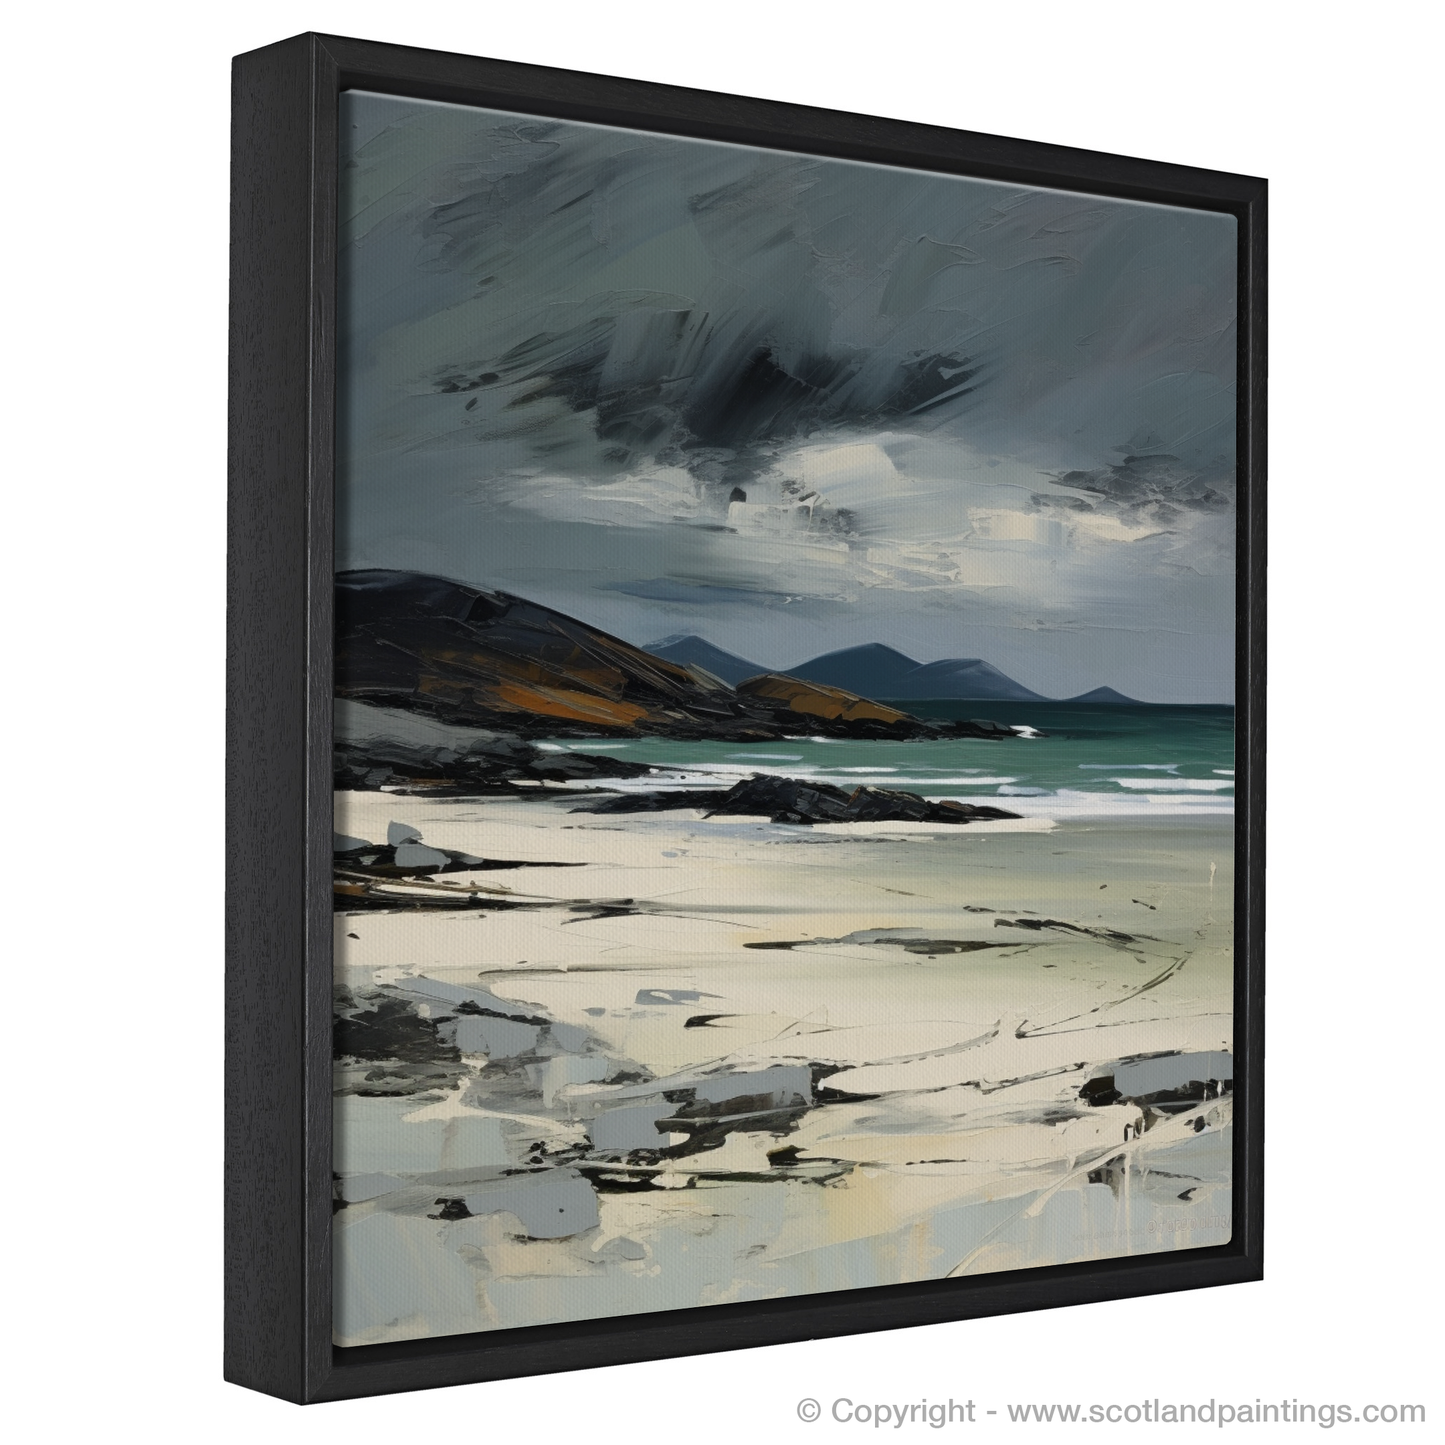 Painting and Art Print of Traigh Mhor, Isle of Barra entitled "Wild Shores of Traigh Mhor".